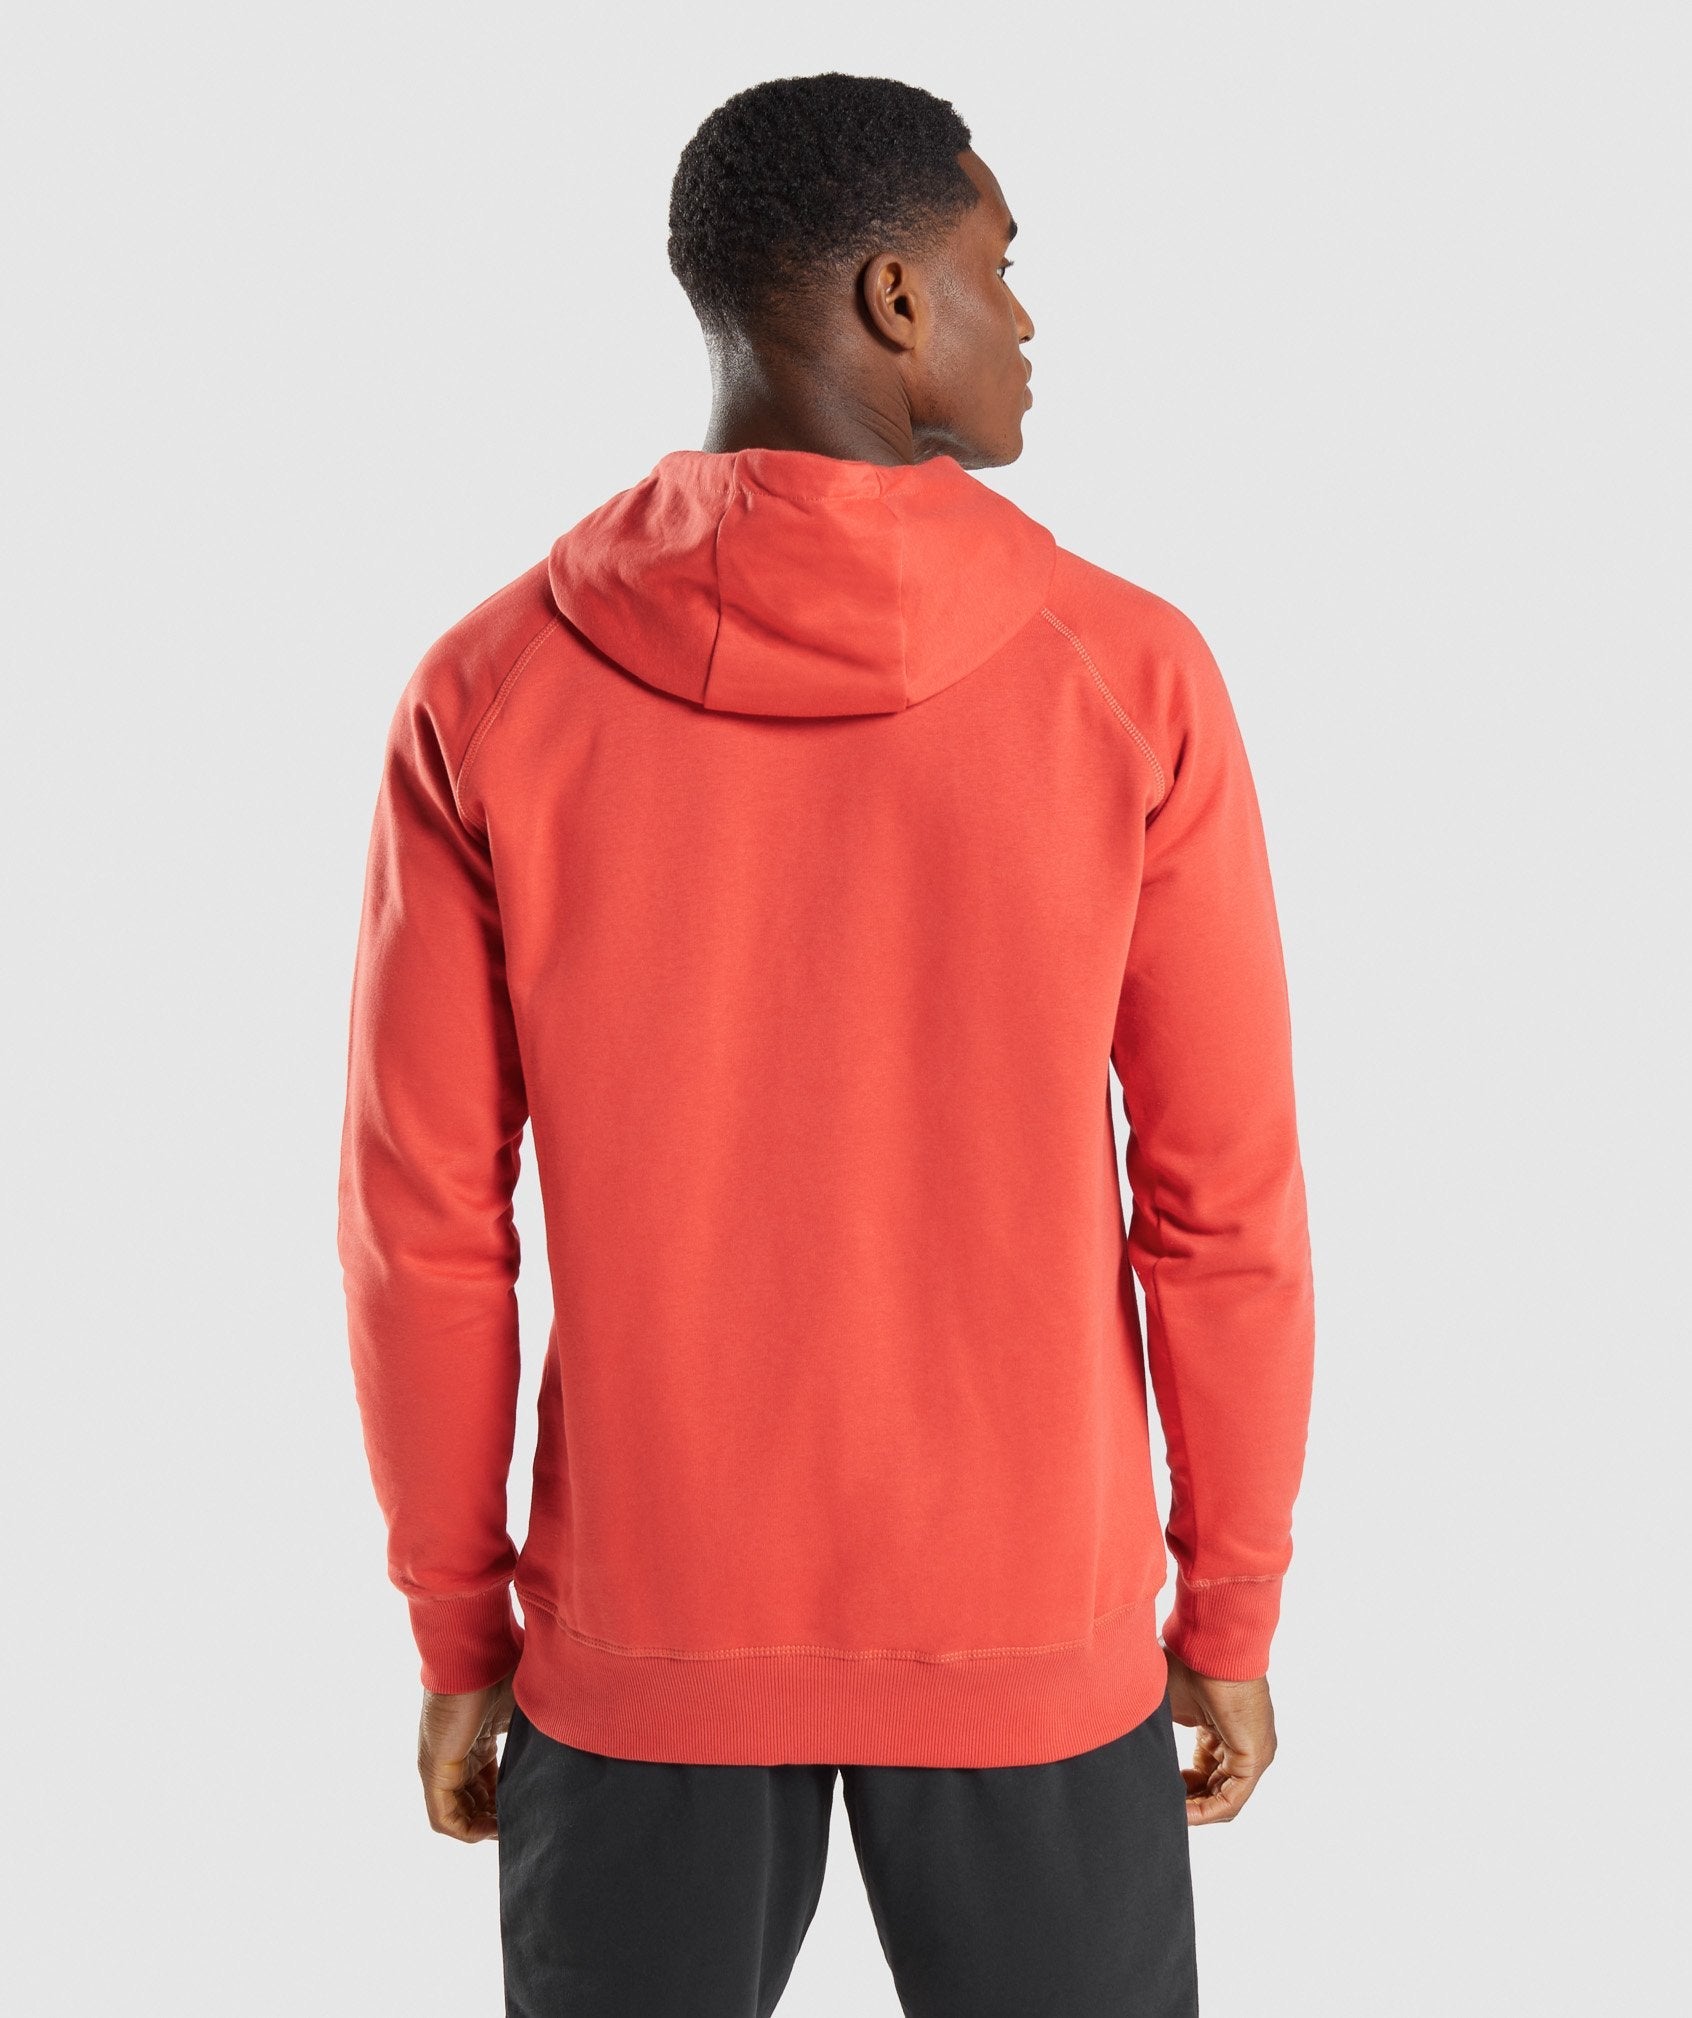 Sharkhead Infill Hoodie in Red - view 2